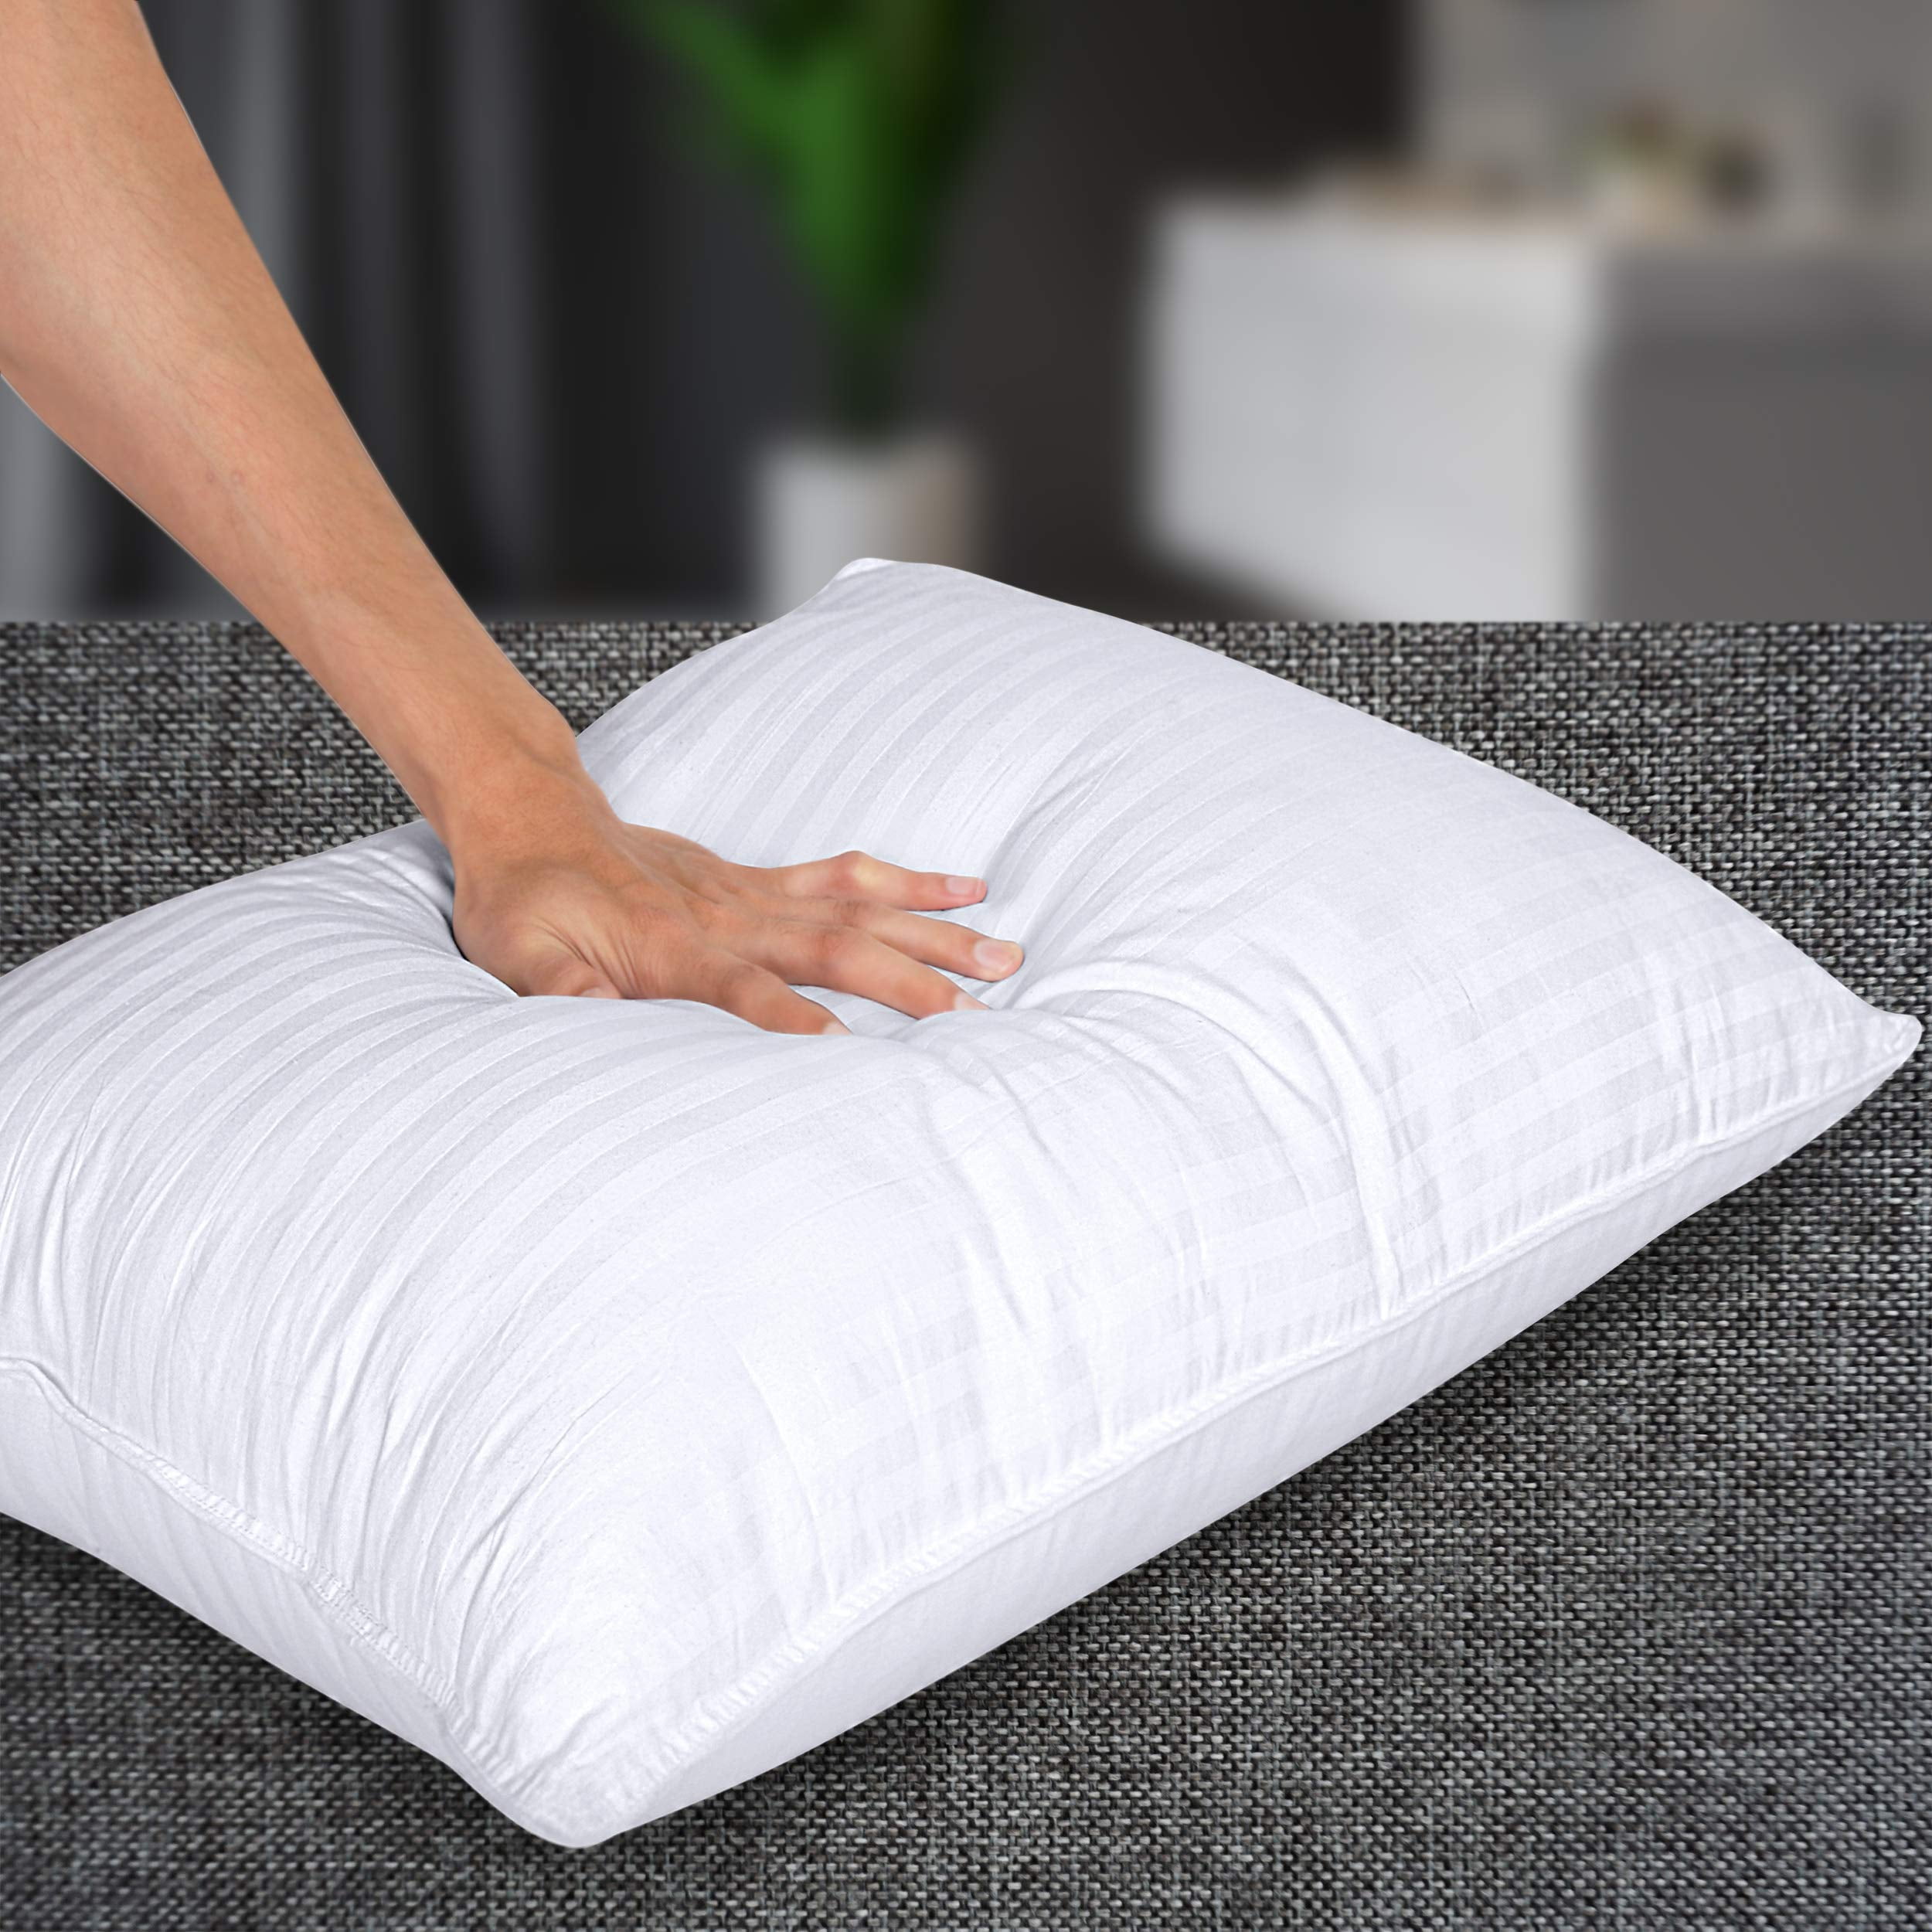 Utopia Bedding Bed Pillows for Sleeping Queen Size (White), Set of 2,  Cooling